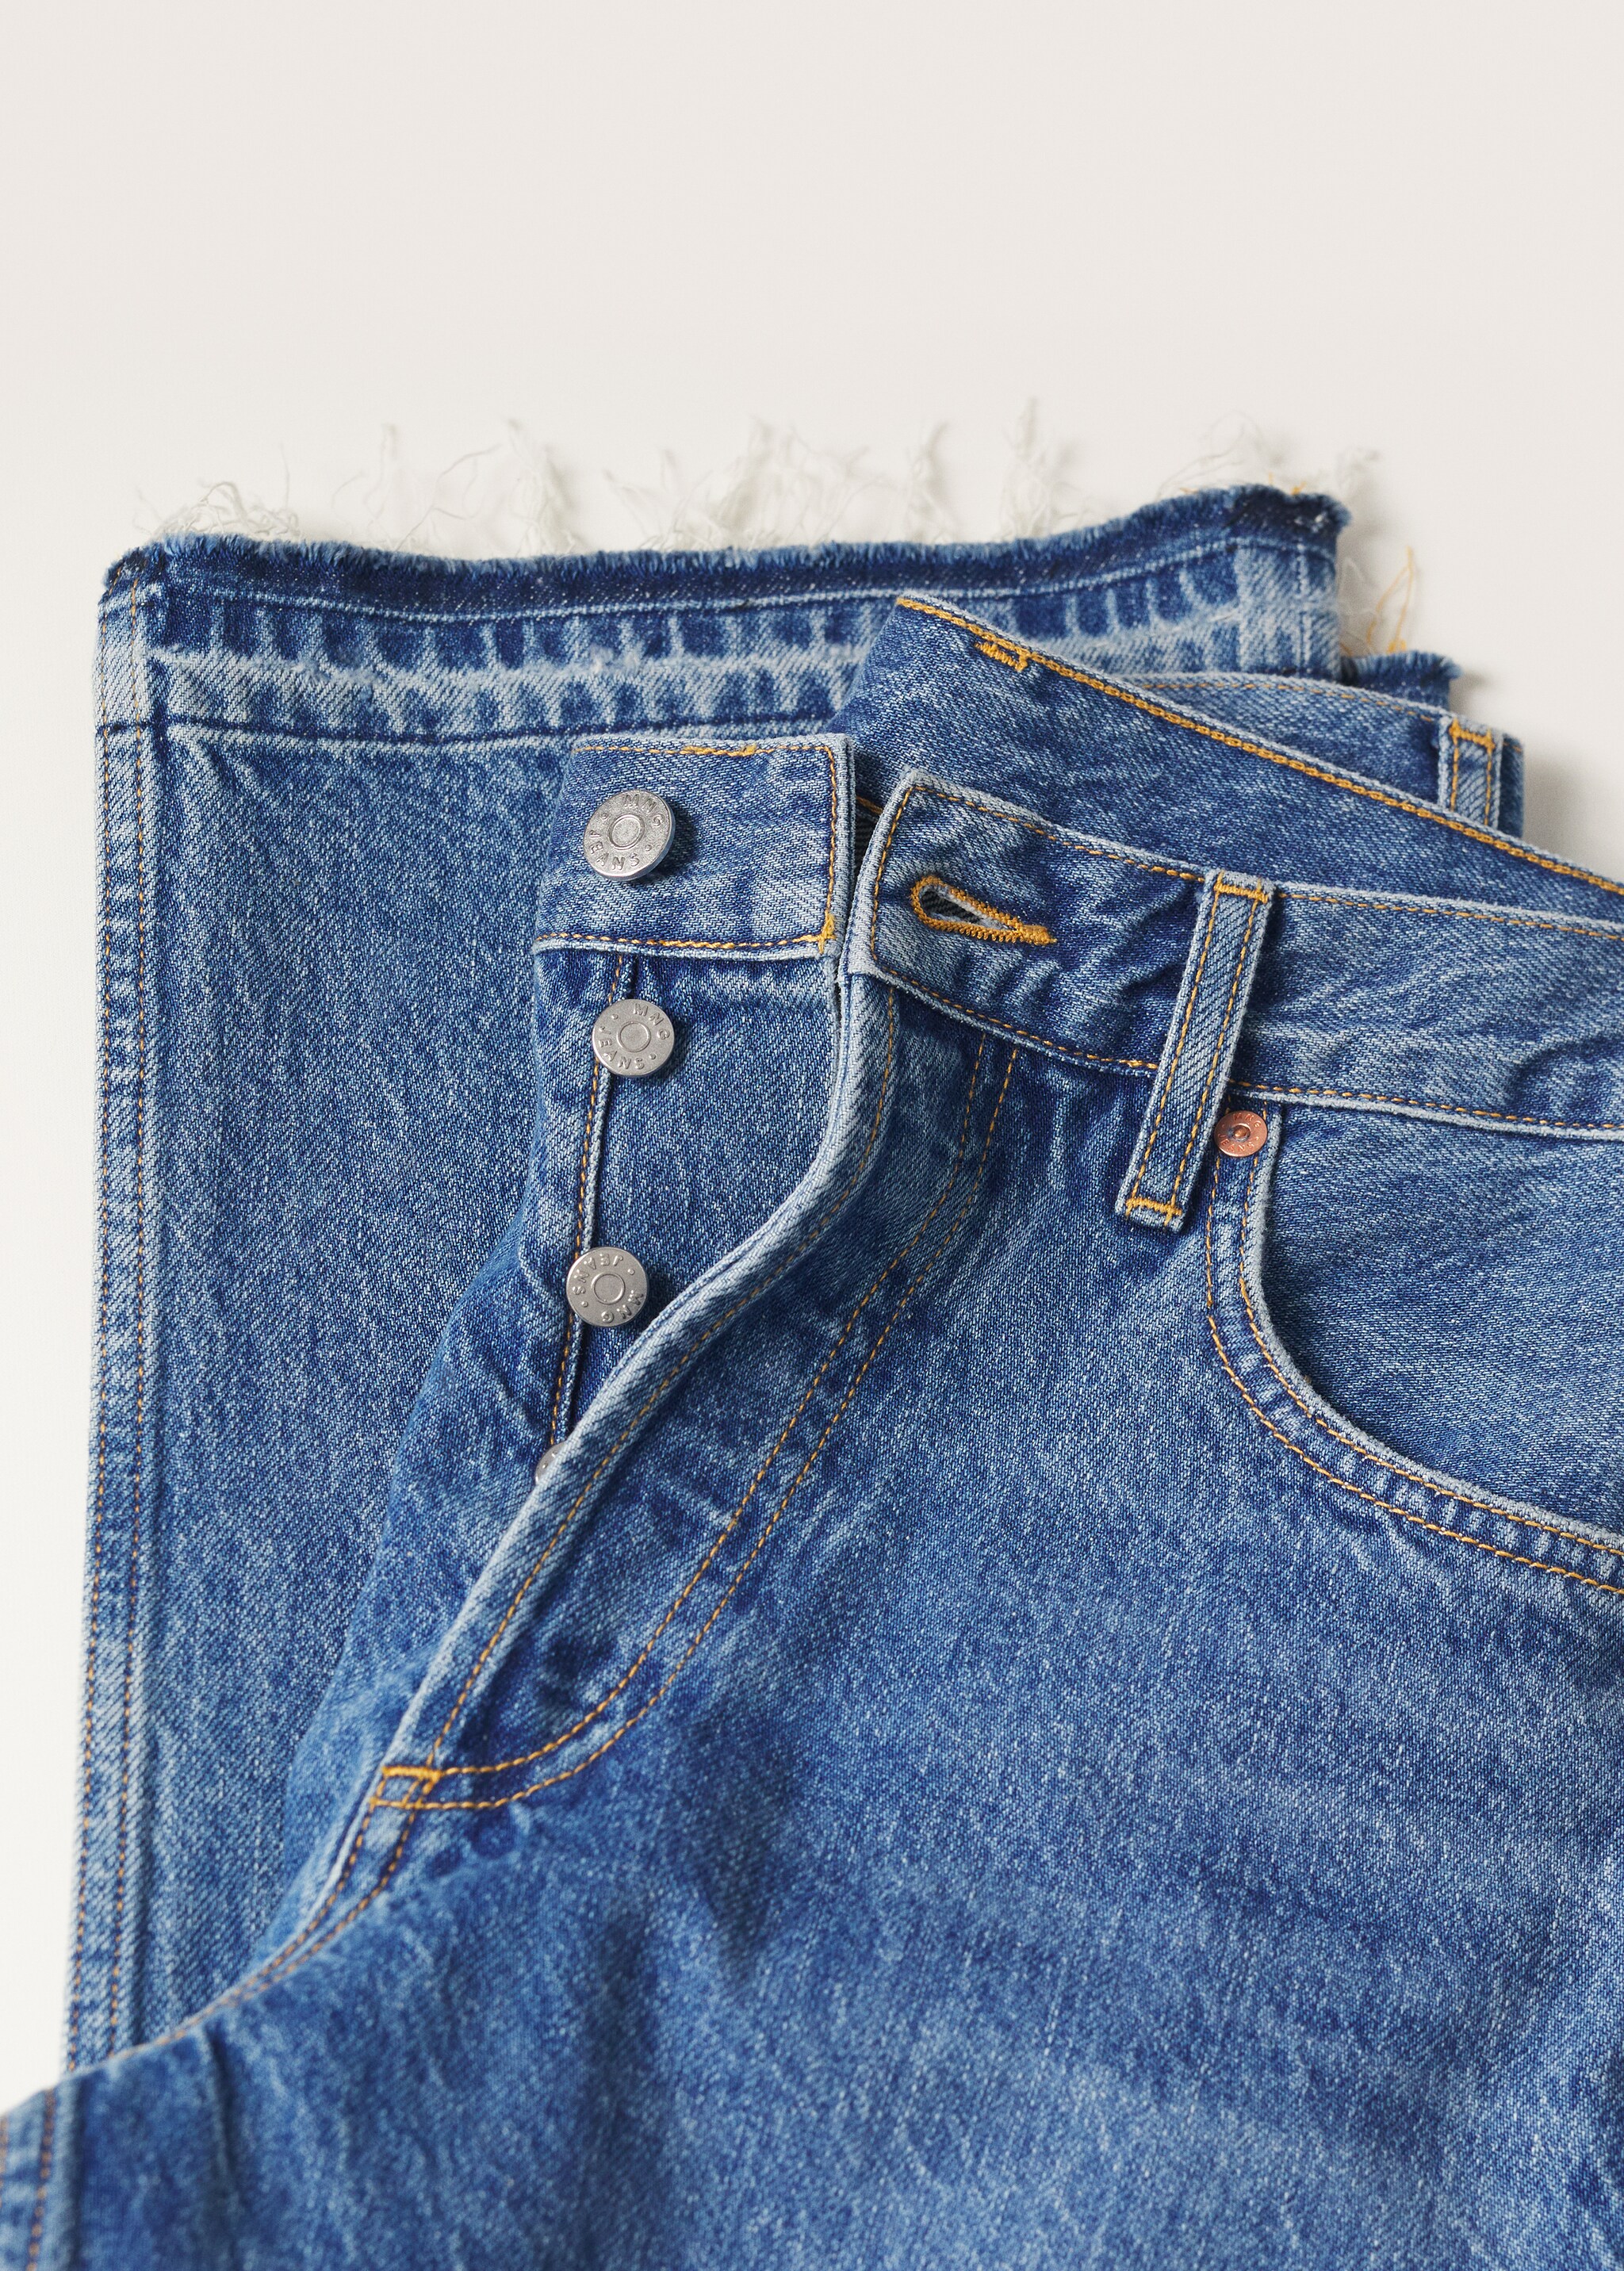 Mid-rise flared jeans - Details of the article 8